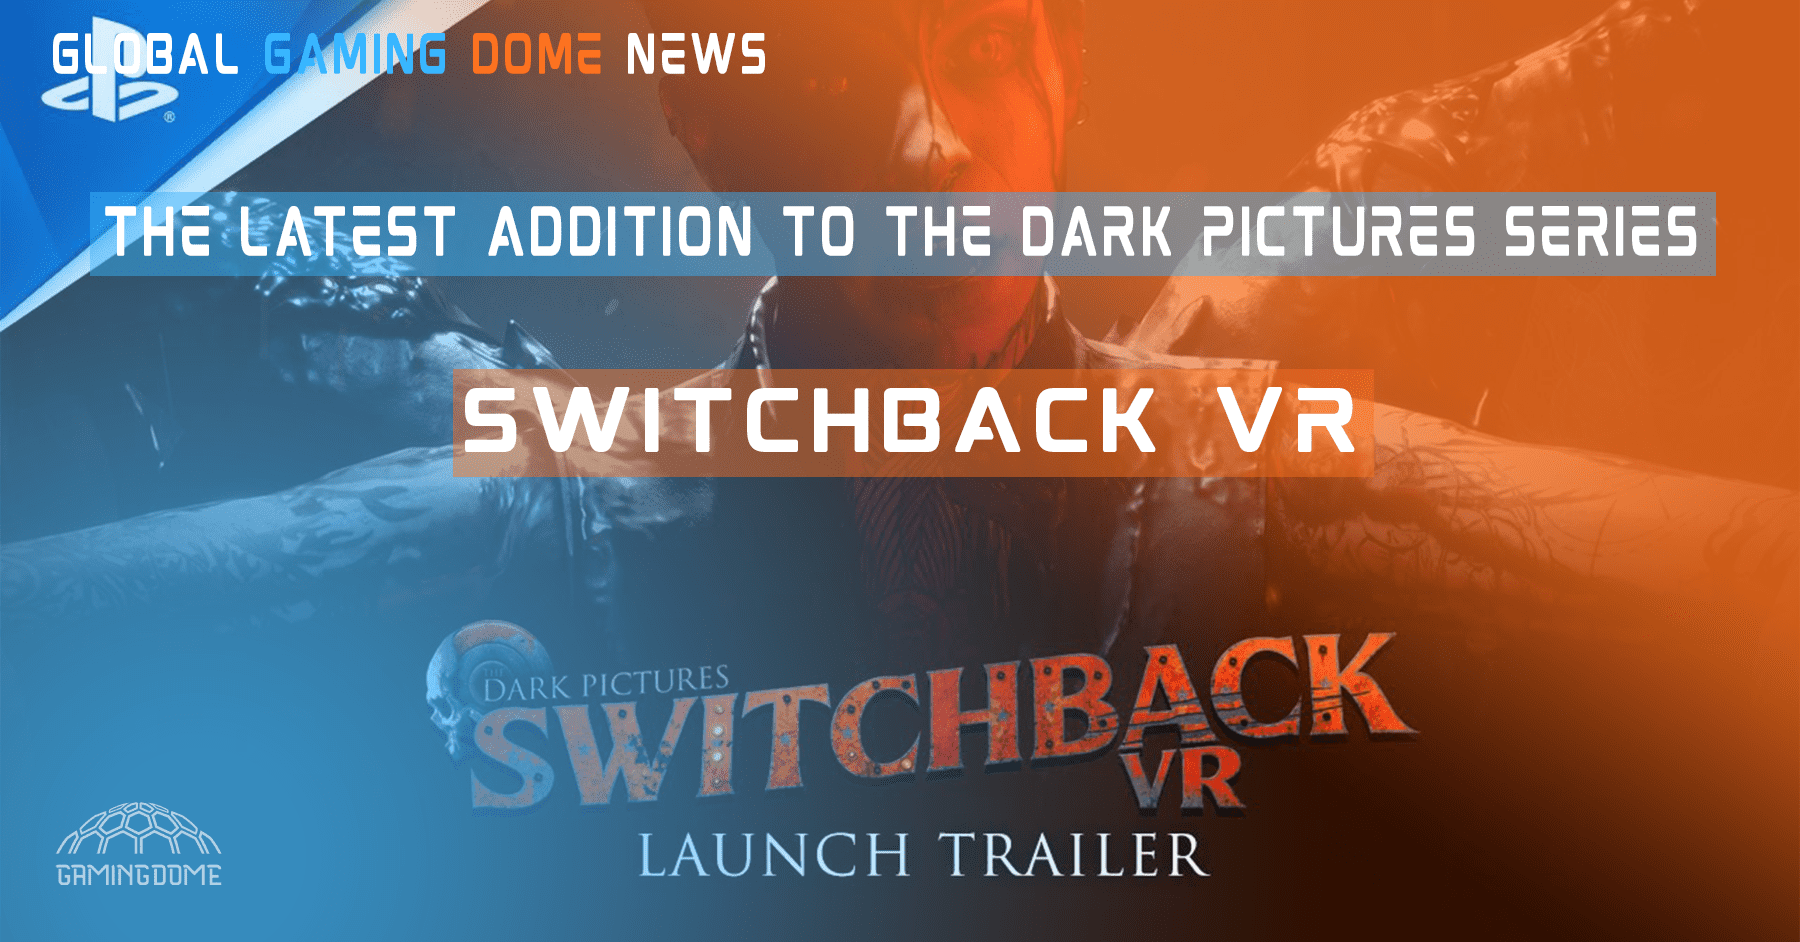 Experience the Terror in Switchback VR - The Latest Addition to The Dark Pictures Series